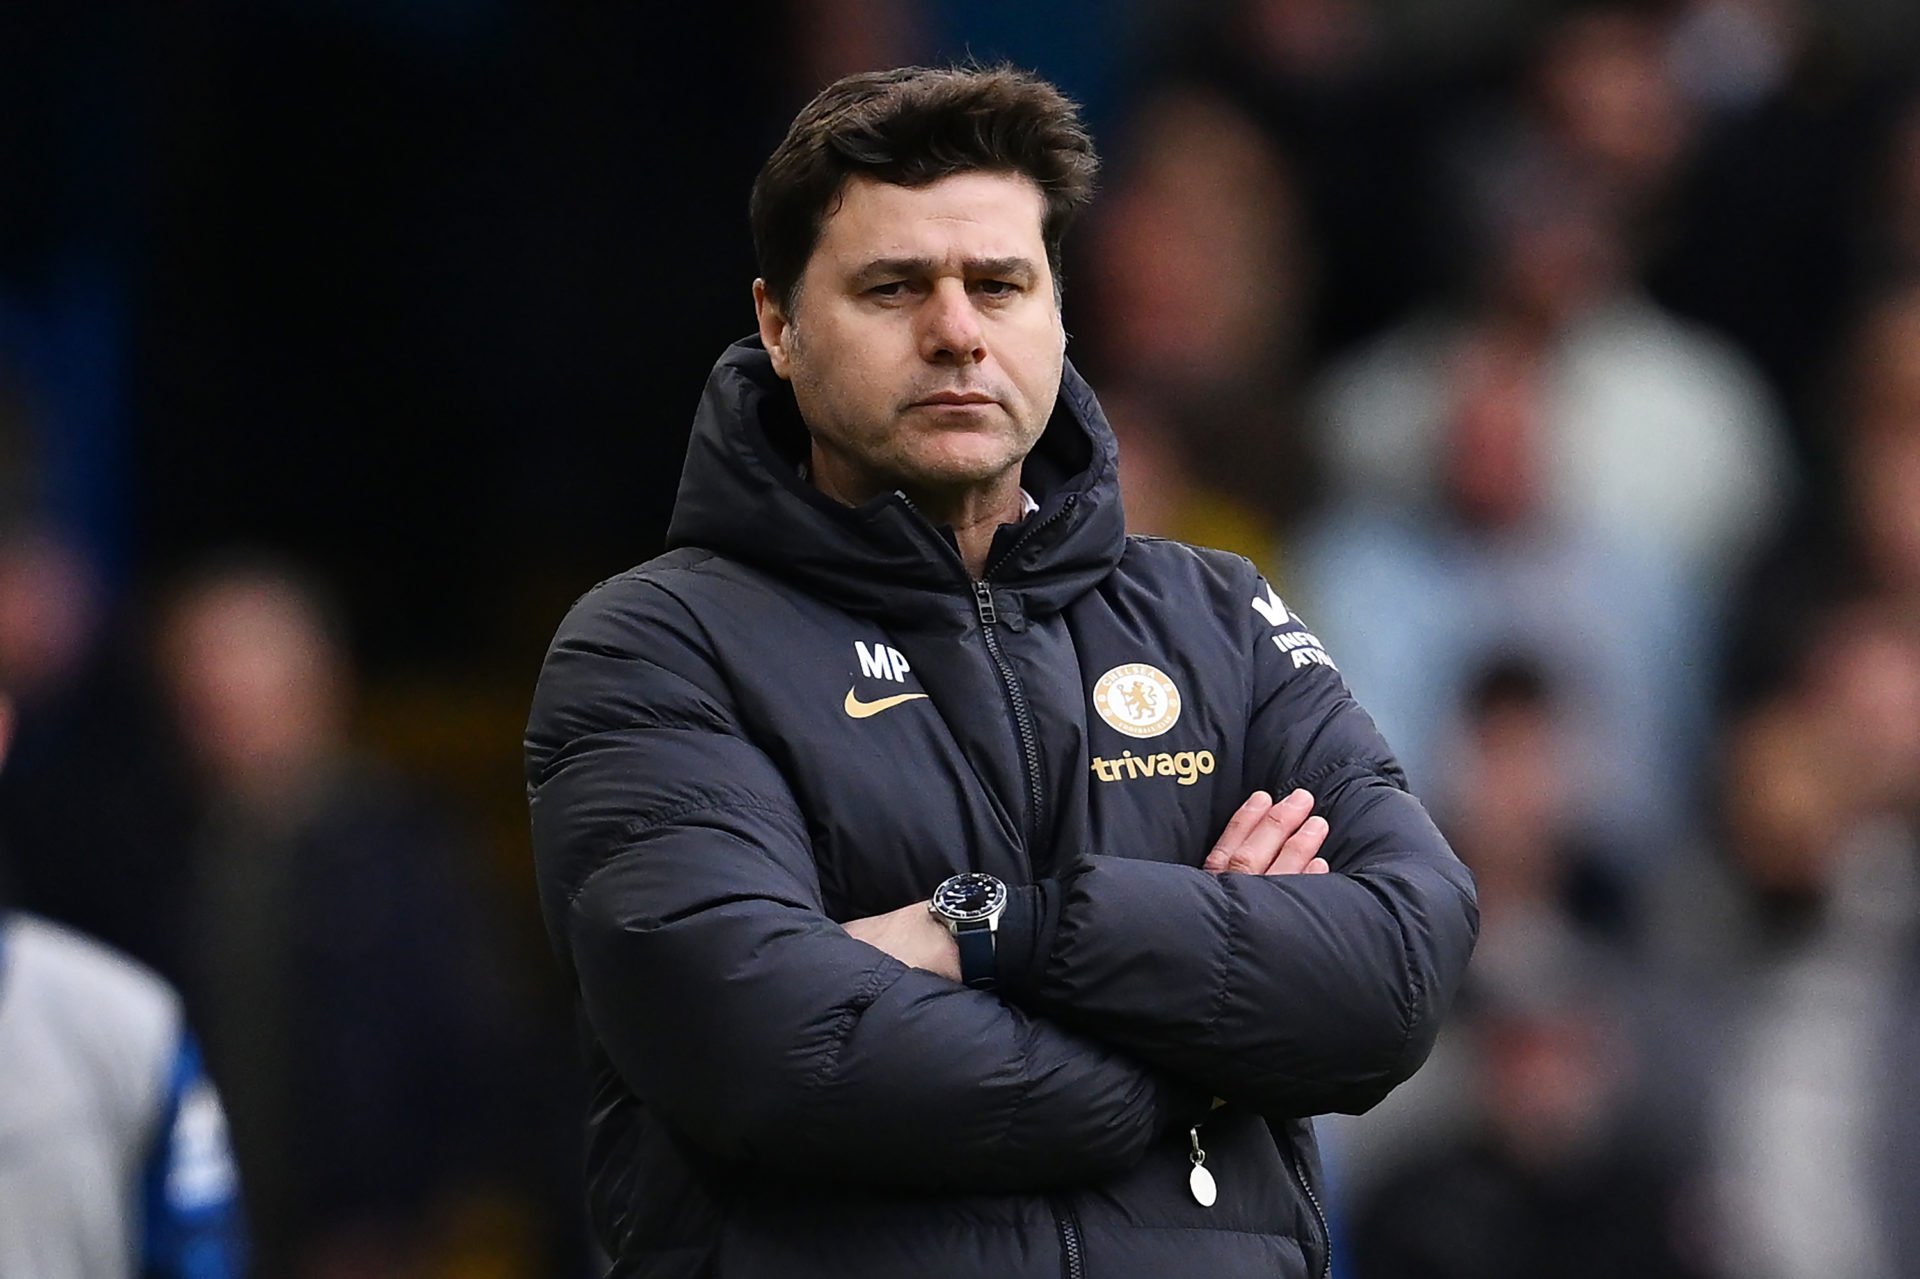 Mauricio Pochettino simply must start 24-year-old Chelsea player in every game from now on